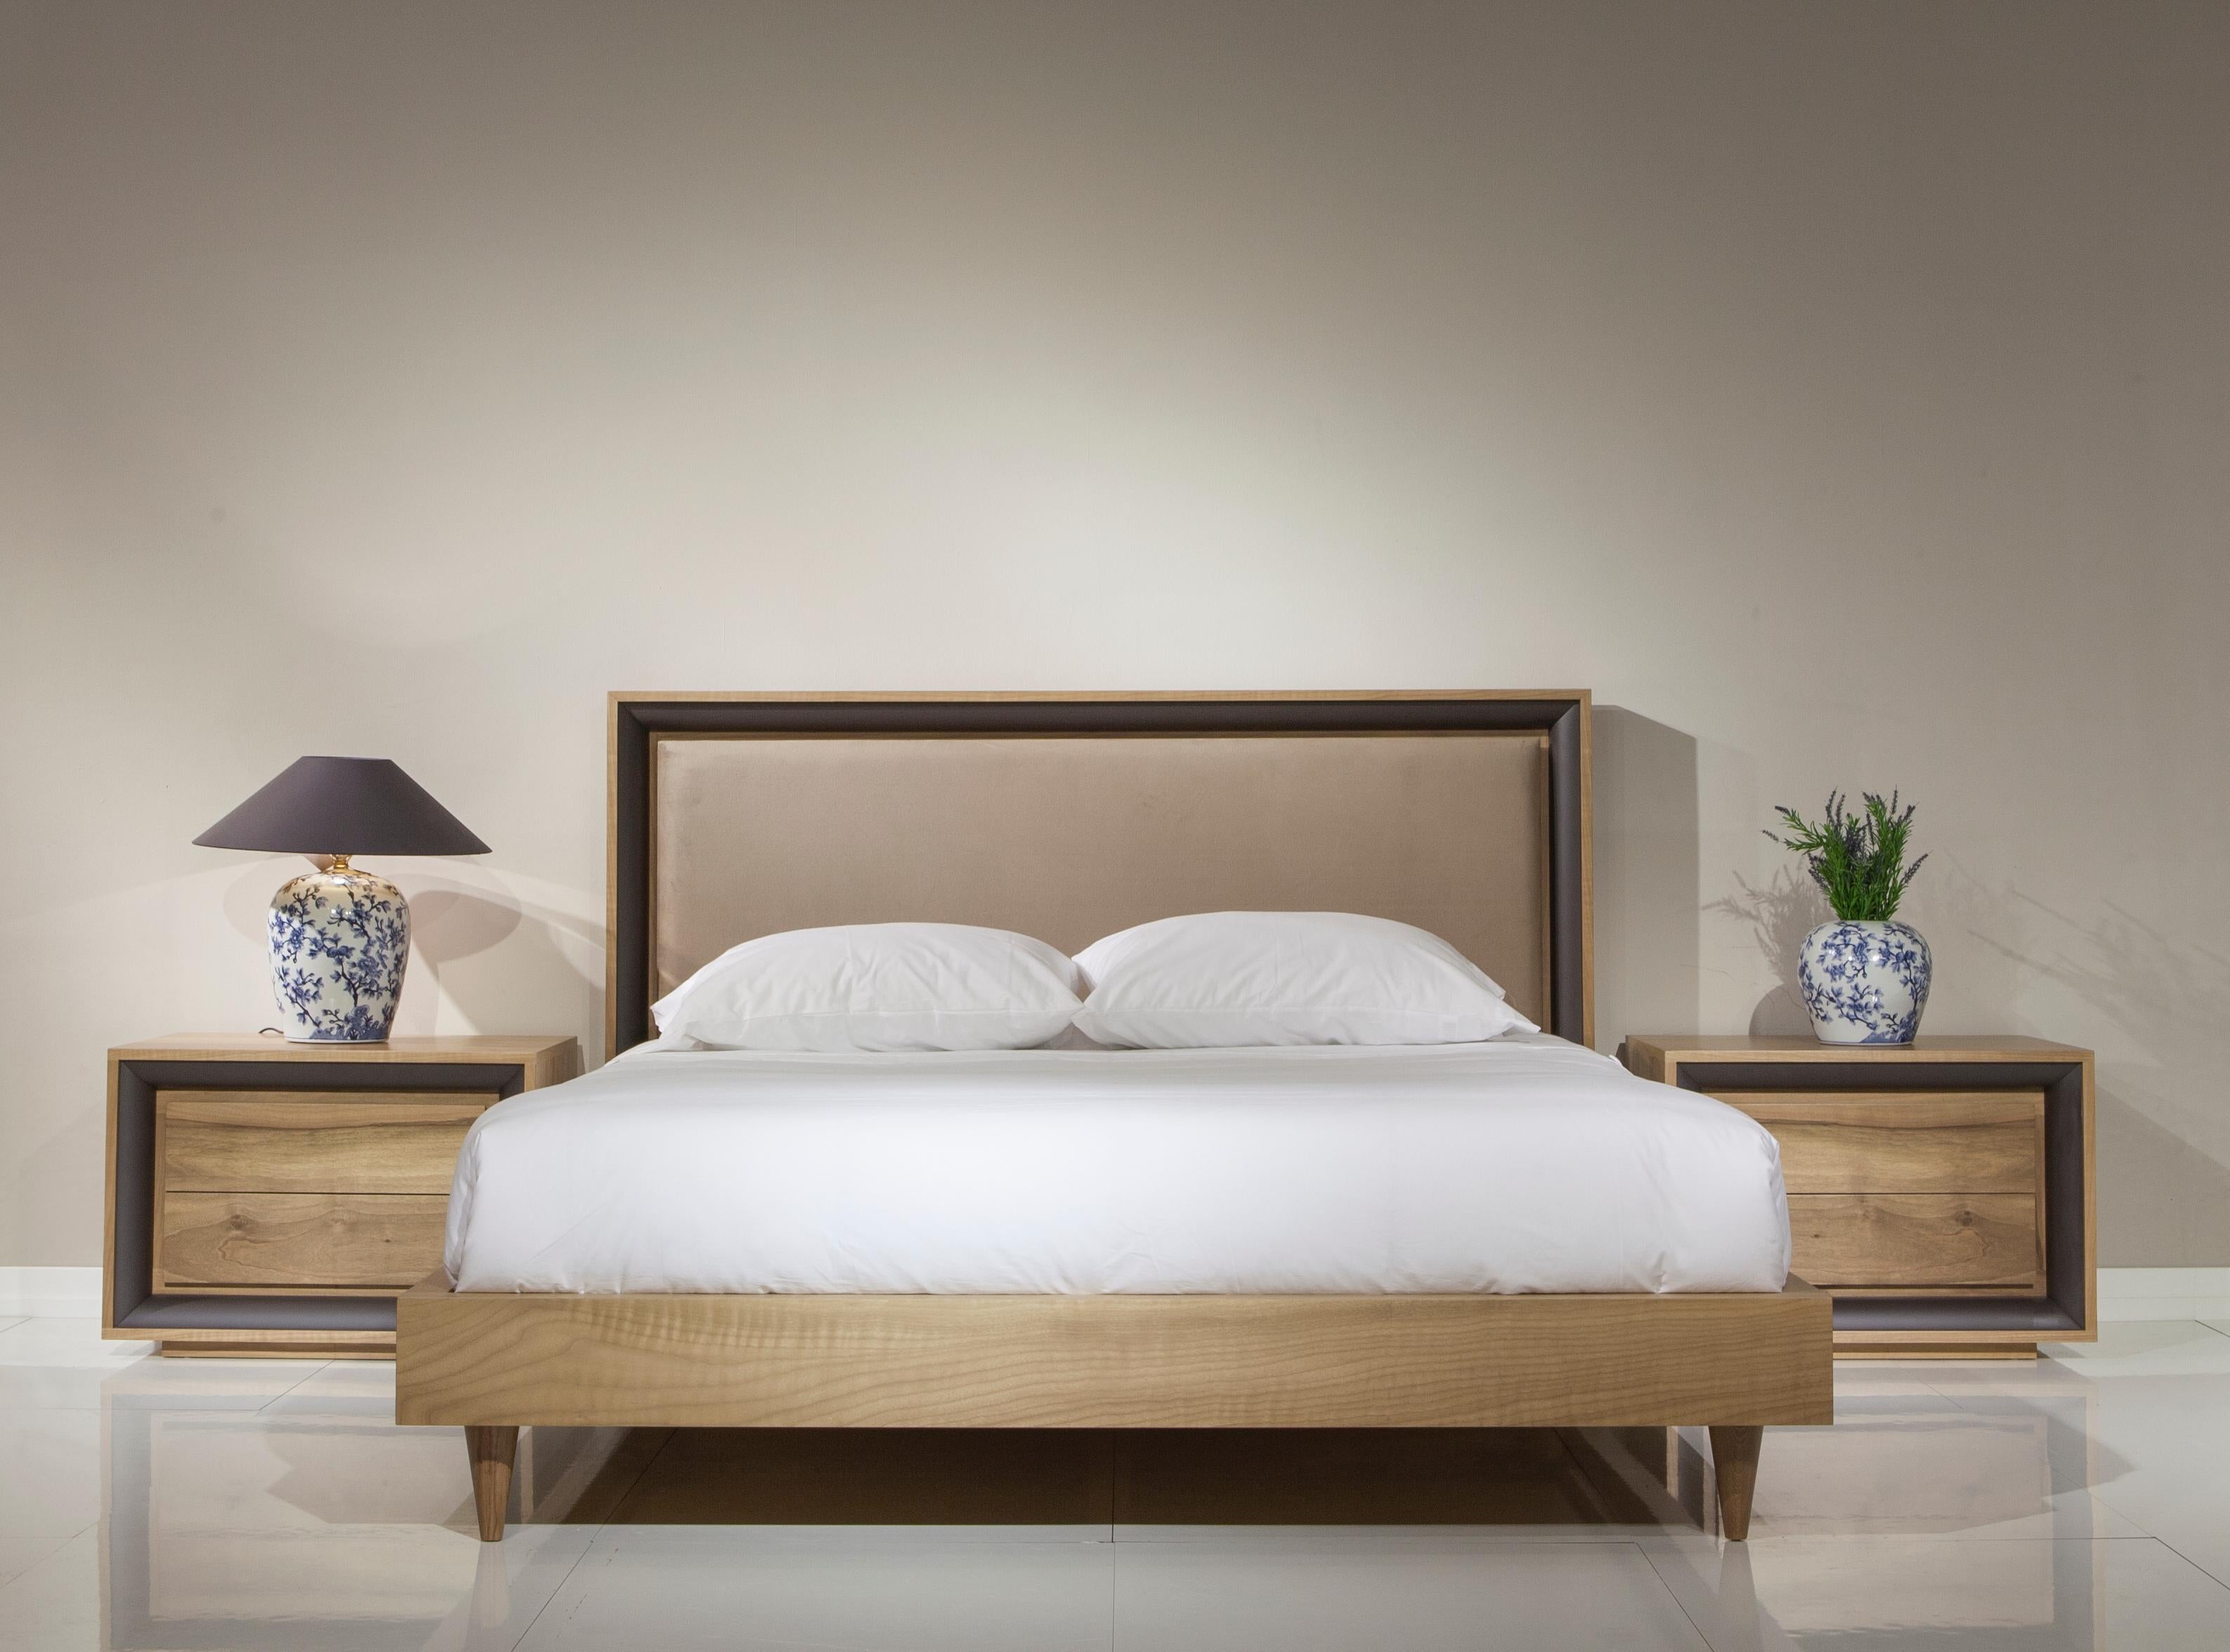 With a fully upholstered headboard, this tailored bed’s slim silhouette features an angled solid wood base that together give it grace and polish.